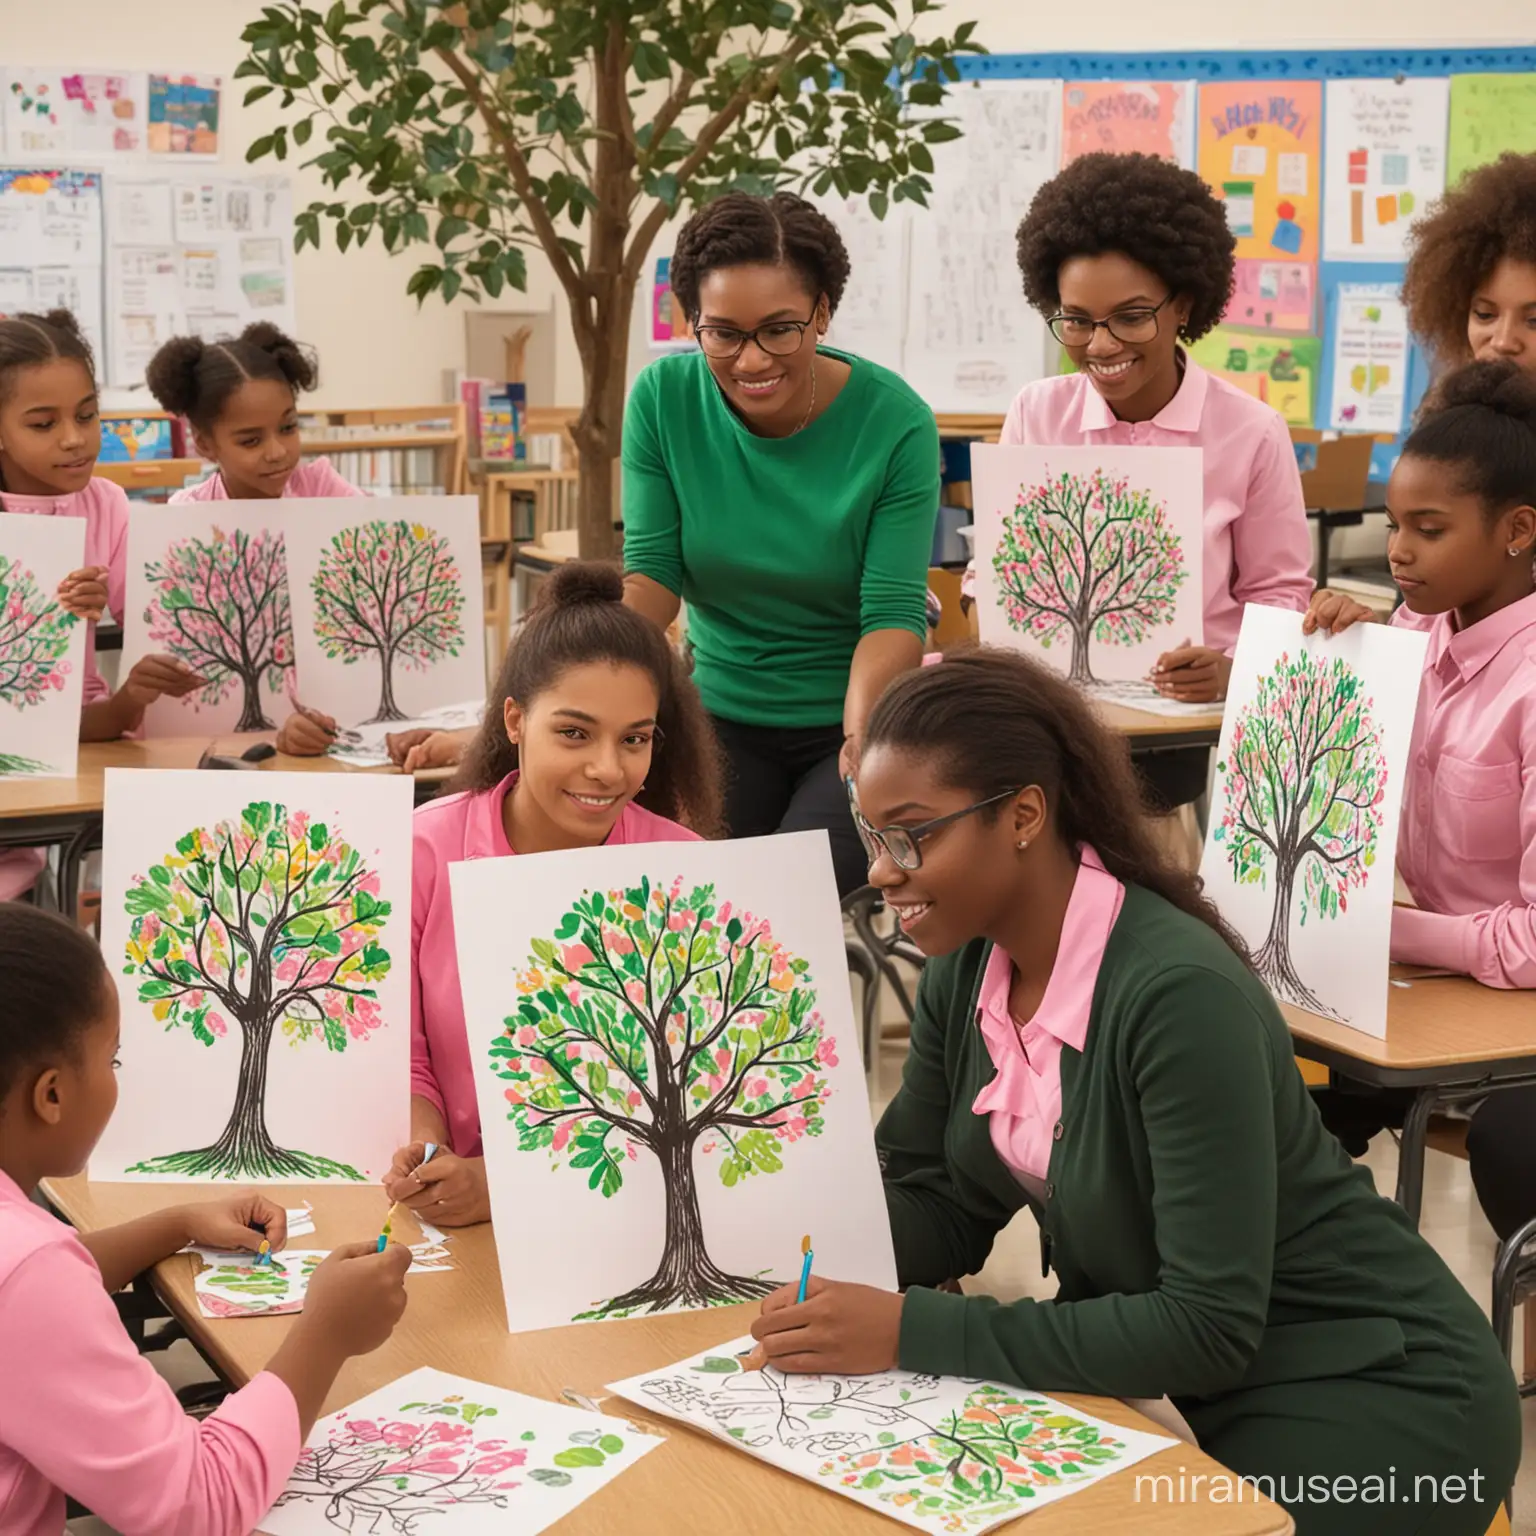 Black ladies dressed in pink and green drawing pictures of tree art on posters with young, black students  and their teachers in a  brightly lit school setting 